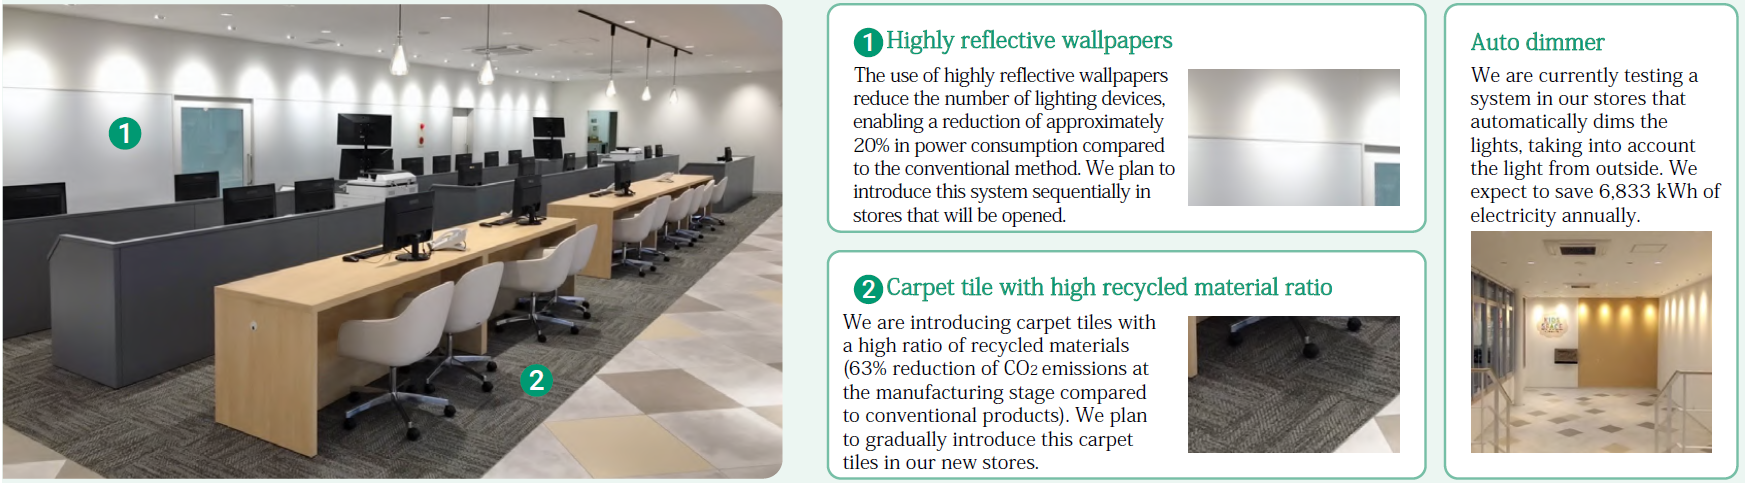 Creating stores with consideration for environmental impact